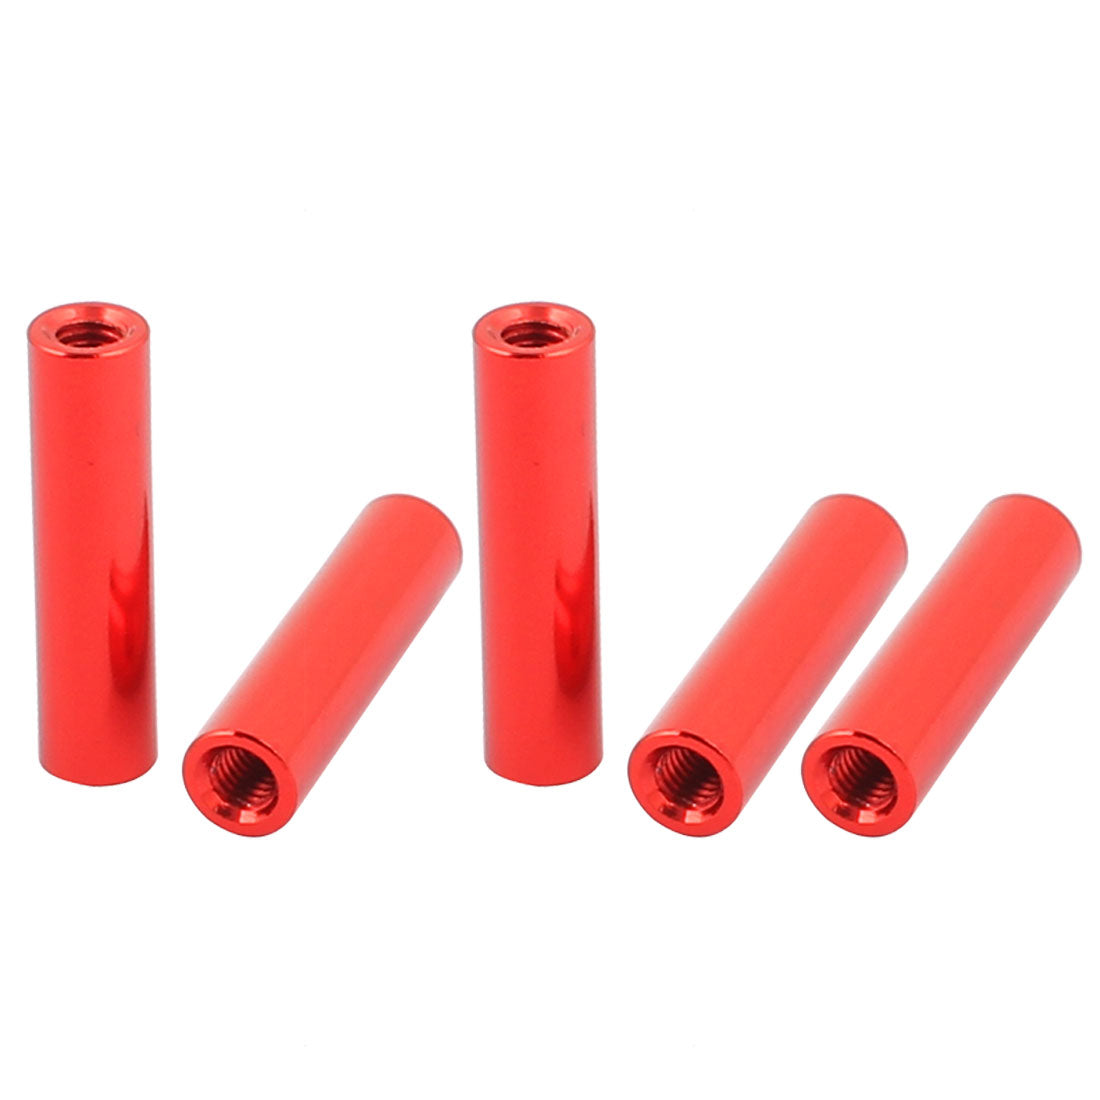 uxcell Uxcell 5 Pcs M3 x 20mm Round Aluminum Column Alloy Standoff Spacer Stud Fastener for Quadcopter Red